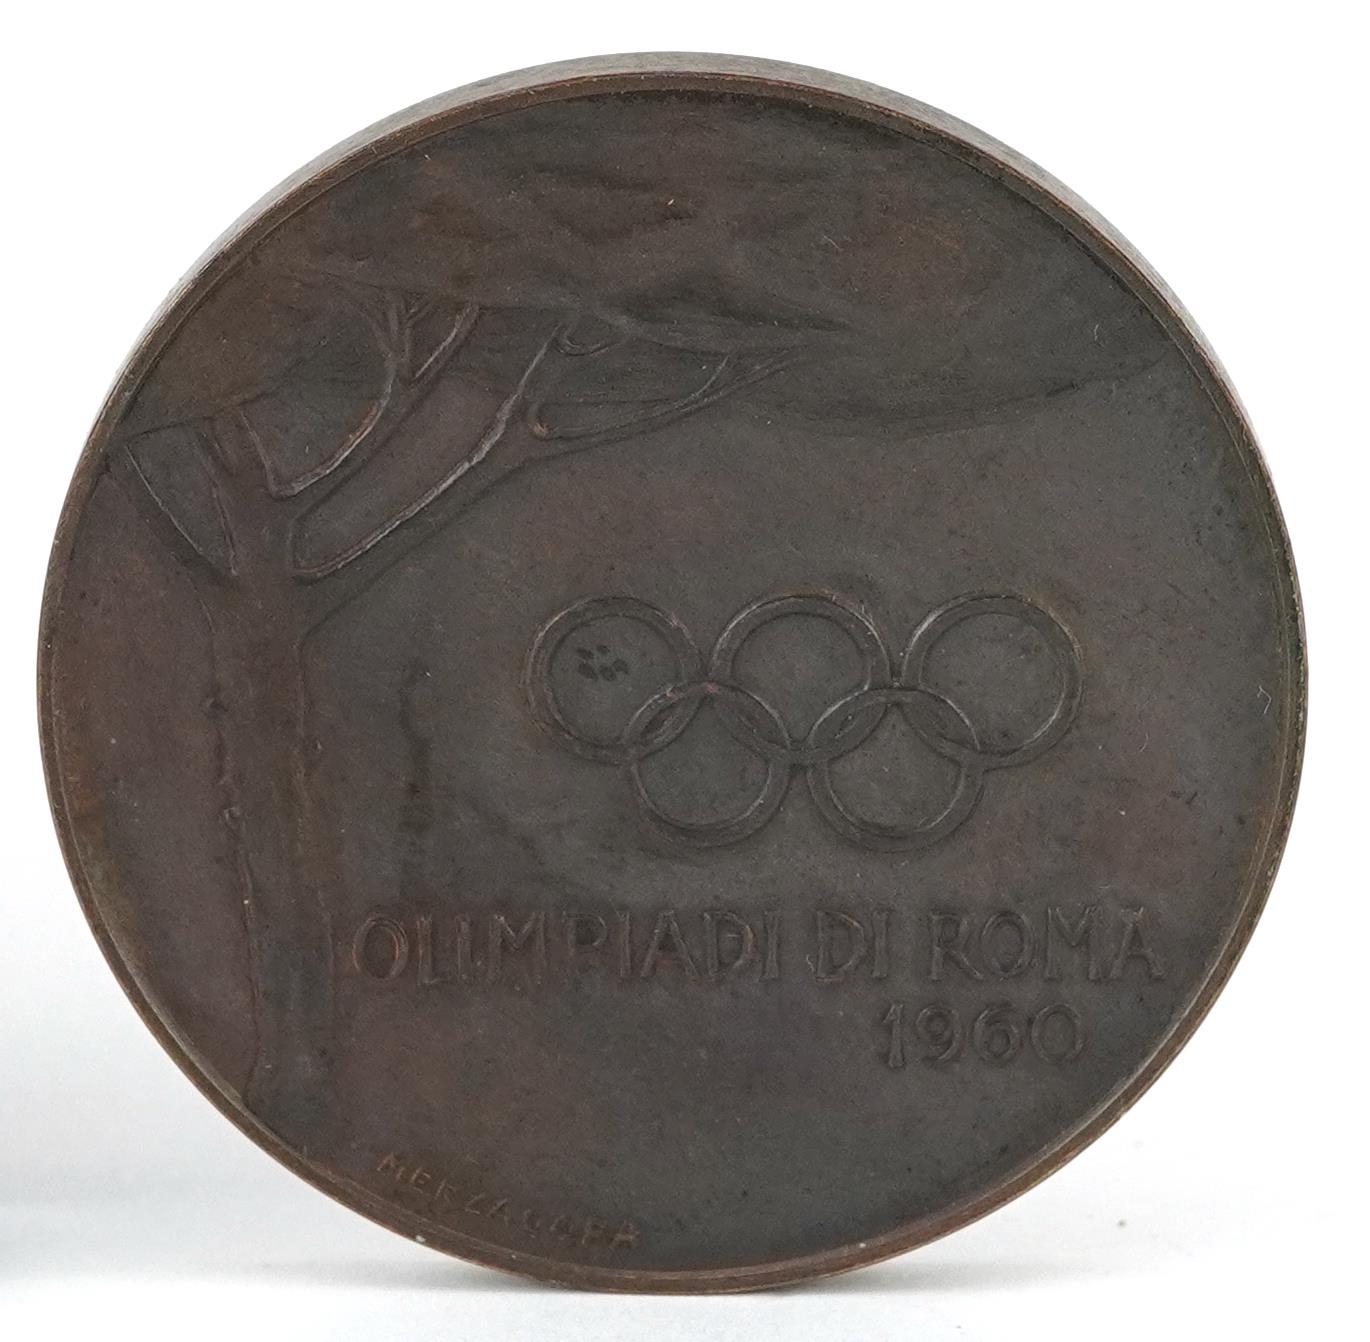 Sporting interest 1960 Olympic bronze medallion and a Italian Athletics Federation desk paperweight, - Image 4 of 4